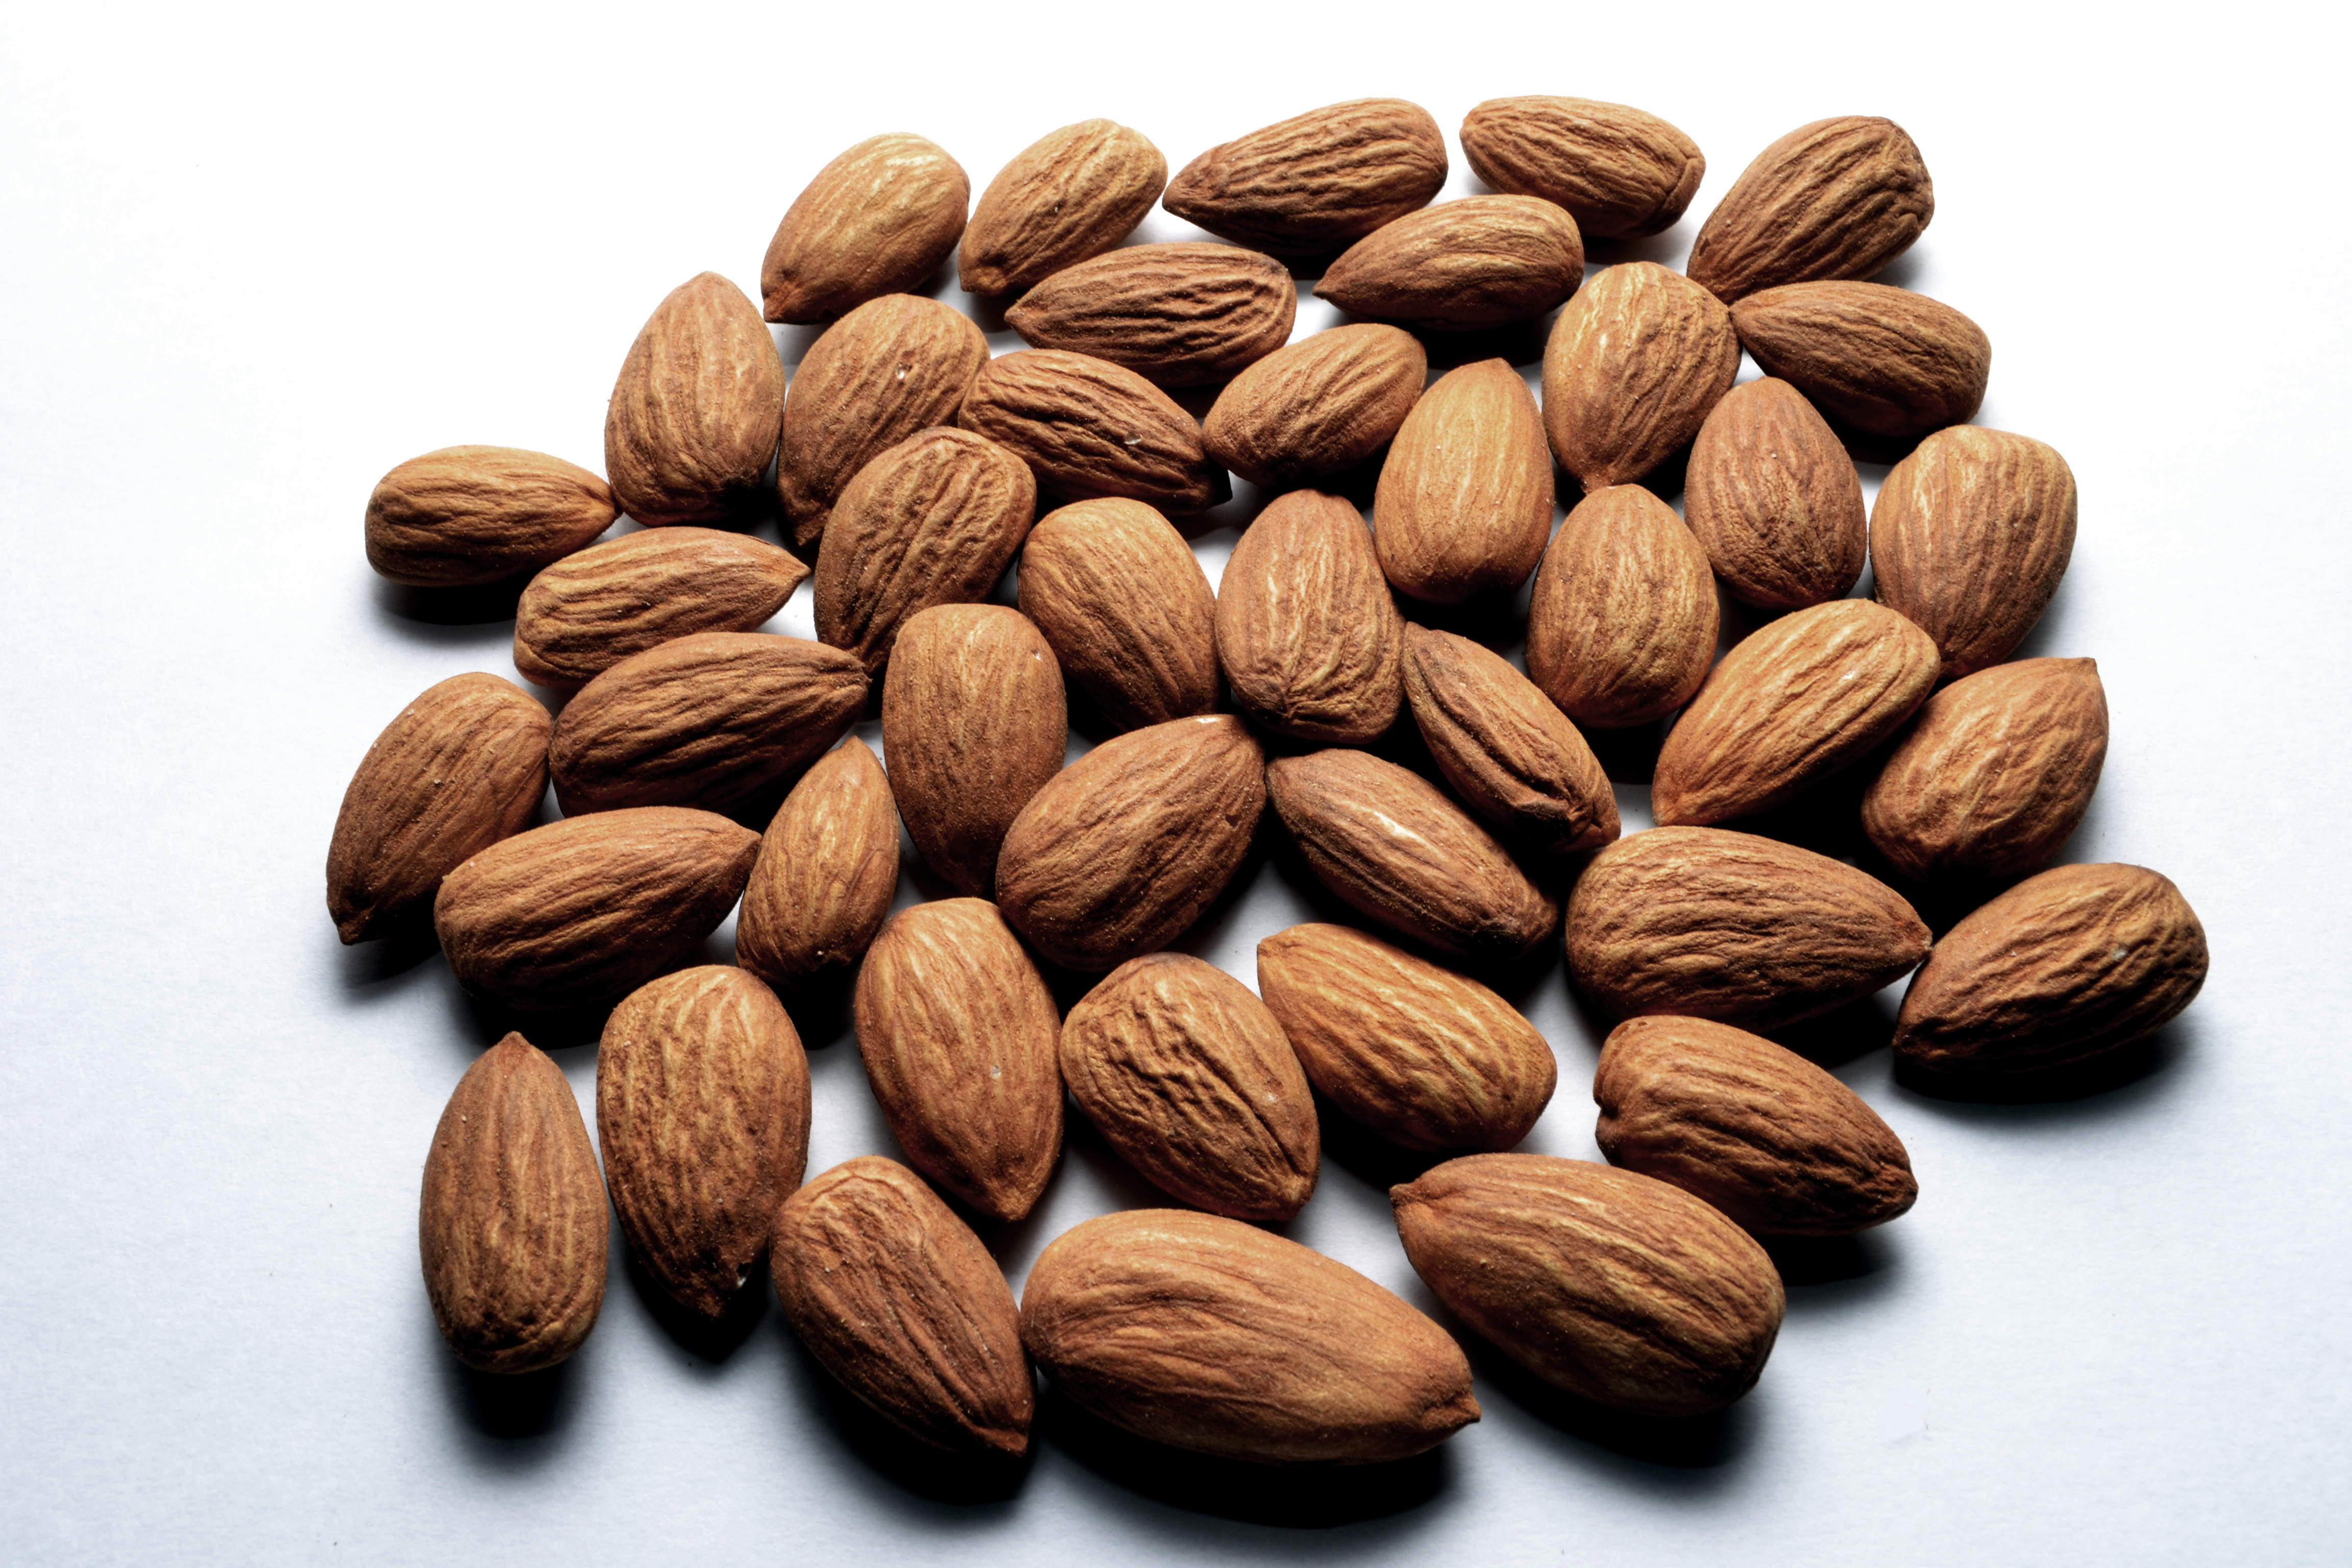 A bunch of almonds on a white background.